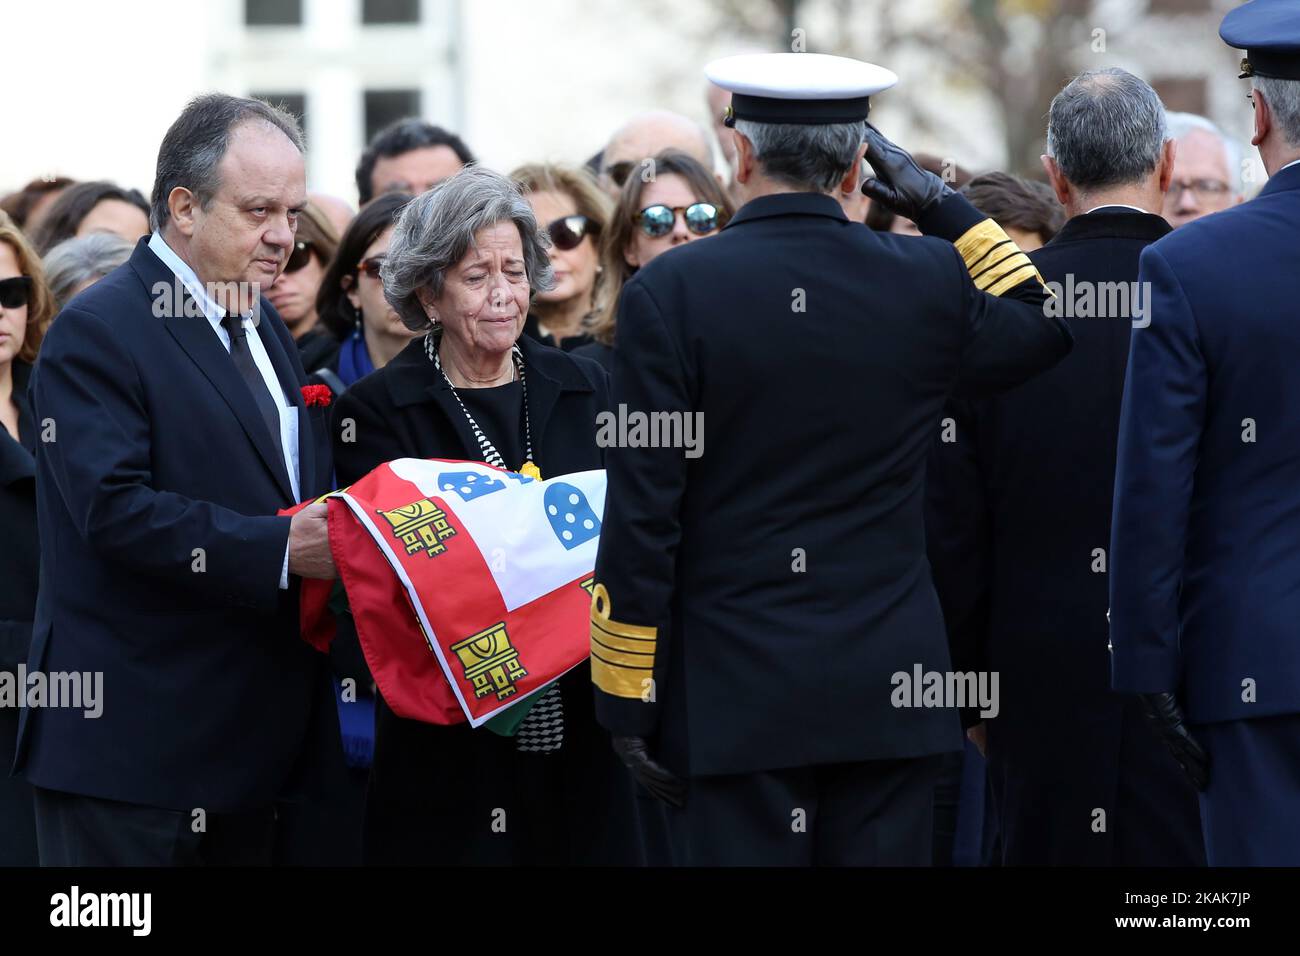 Portugal's President Marcelo Rebelo de Sousa (unseen) delivers the Portugal's coffin flag to the son Joo Soares (L ) and daughter Isabel Soares (C ) during the Funeral Ceremony of the late former Portuguese President Mario Soares at the Prazeres cemetery in Lisbon, on January 10, 2017. The founder of Portugal's Socialist Party, who served as president from 1986-96, died in hospital on January 7, 2017. ( Photo by Pedro Fiuza/NurPhoto) *** Please Use Credit from Credit Field *** Stock Photo